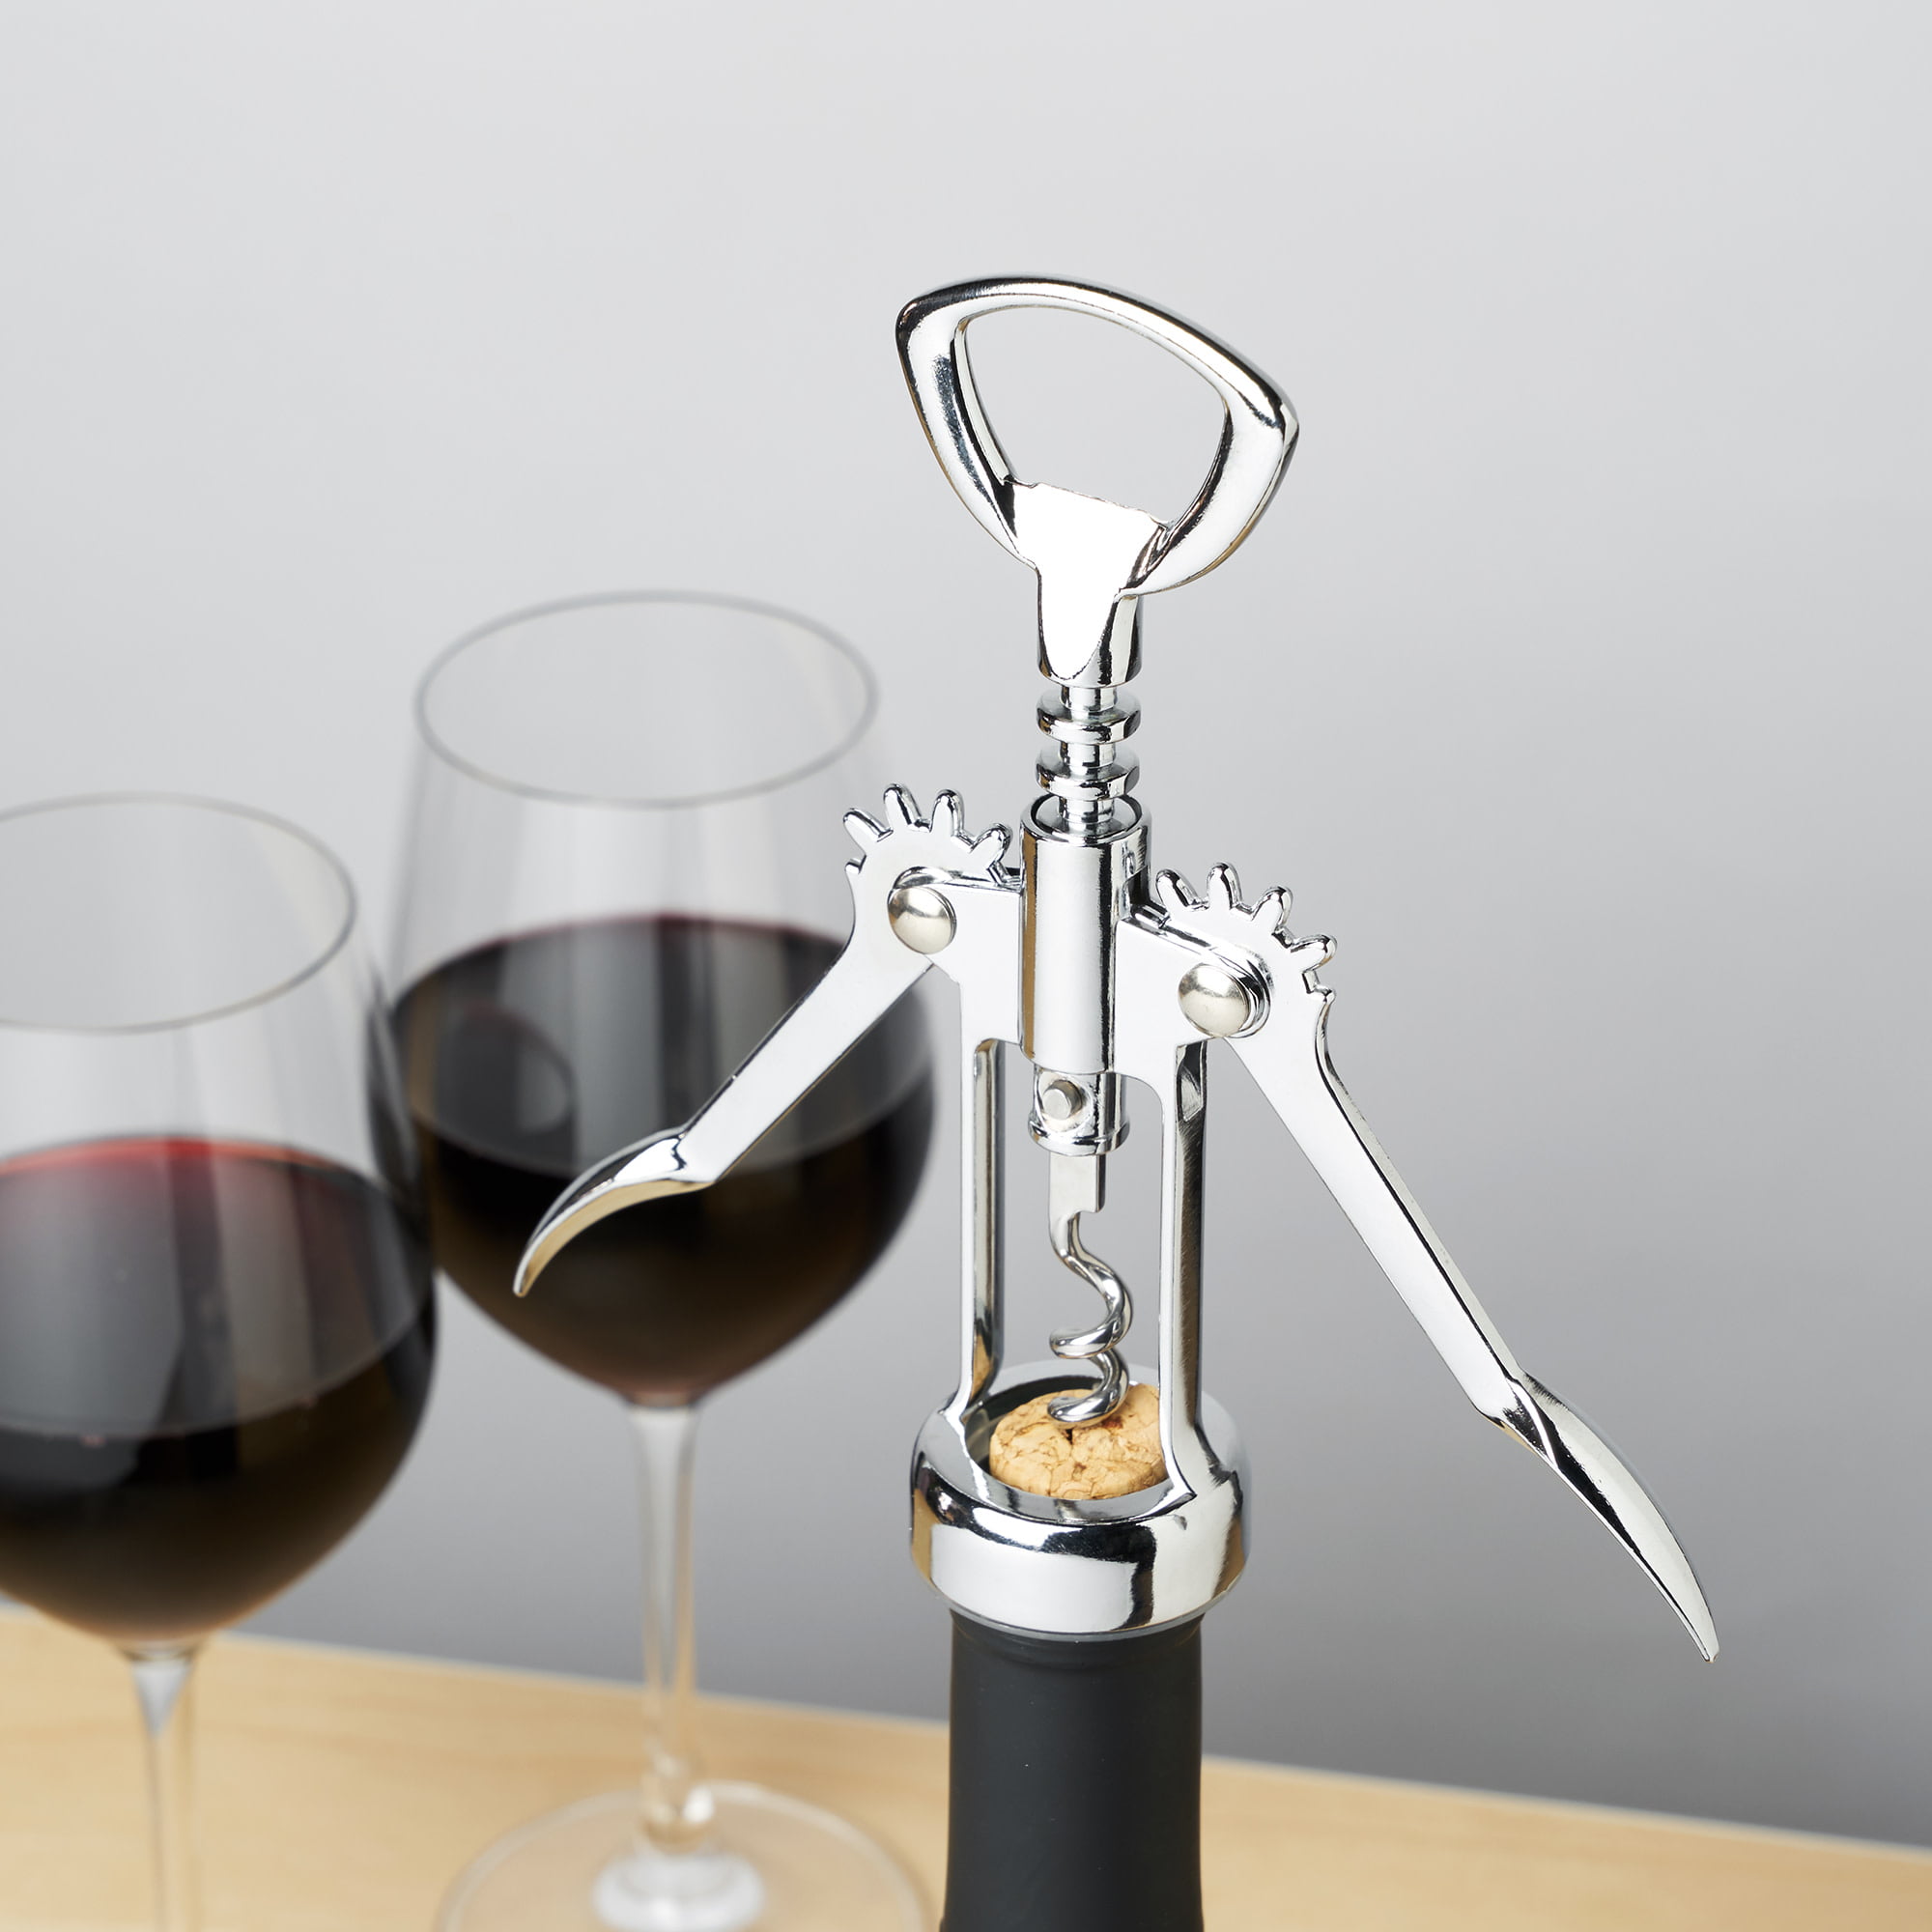 True Spiral Winged Corkscrew, Self Centering Worm, Bottle Opener, Rubber  Grip Arms, Silver Finish : Target